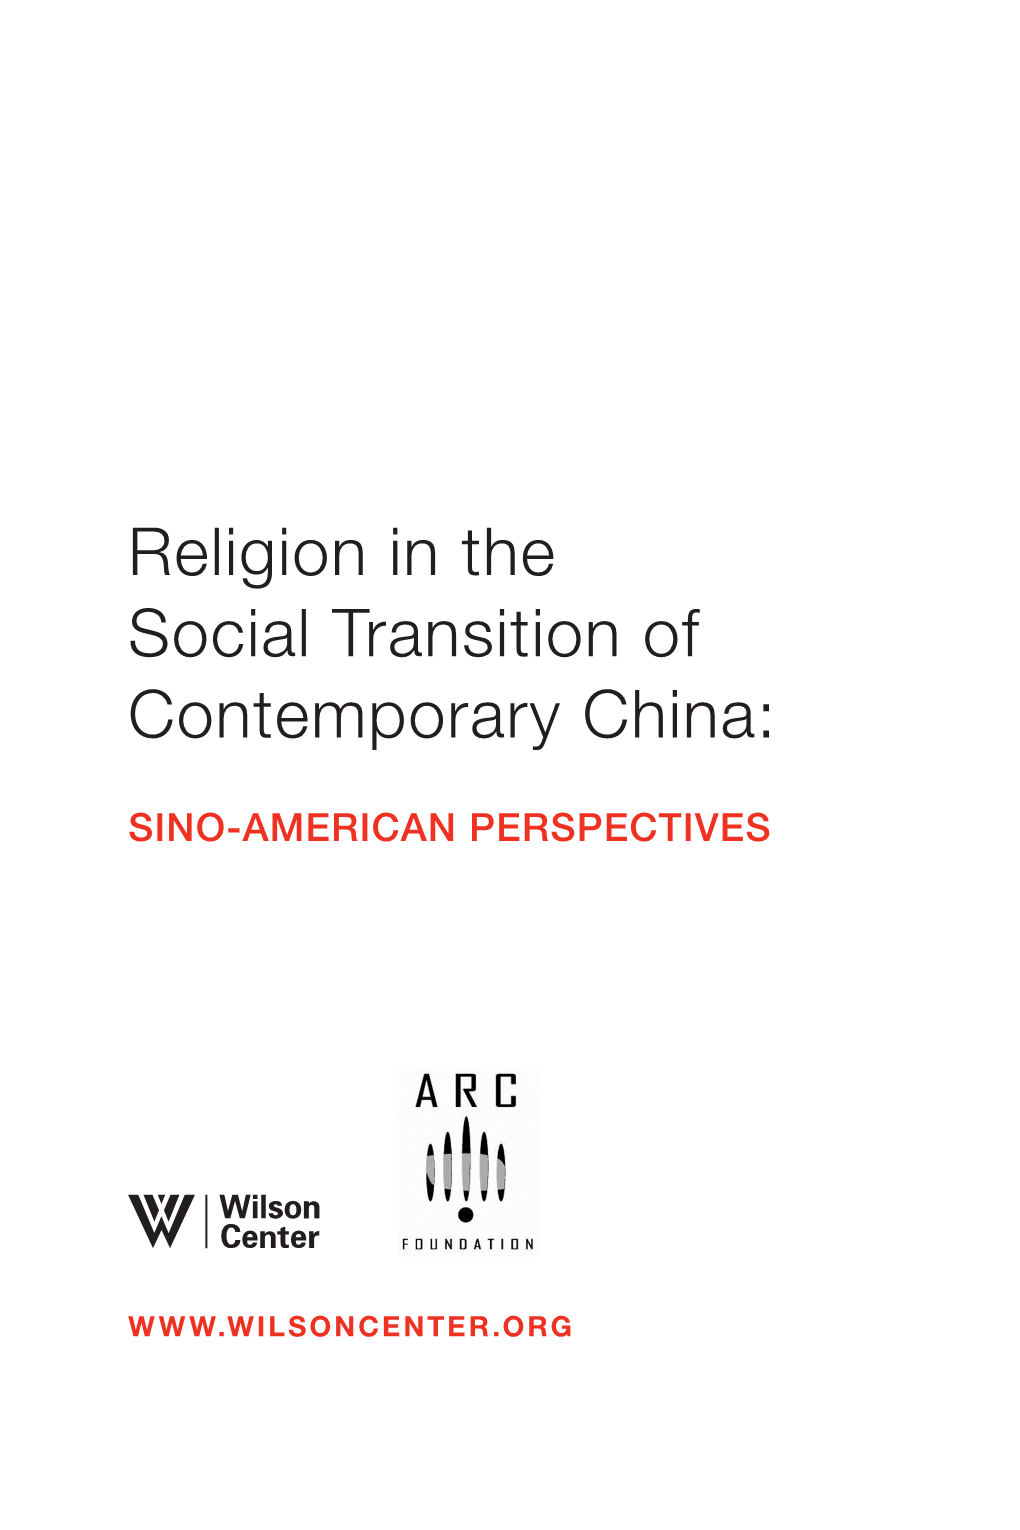 Religion in the Social Transition of Contemporary China